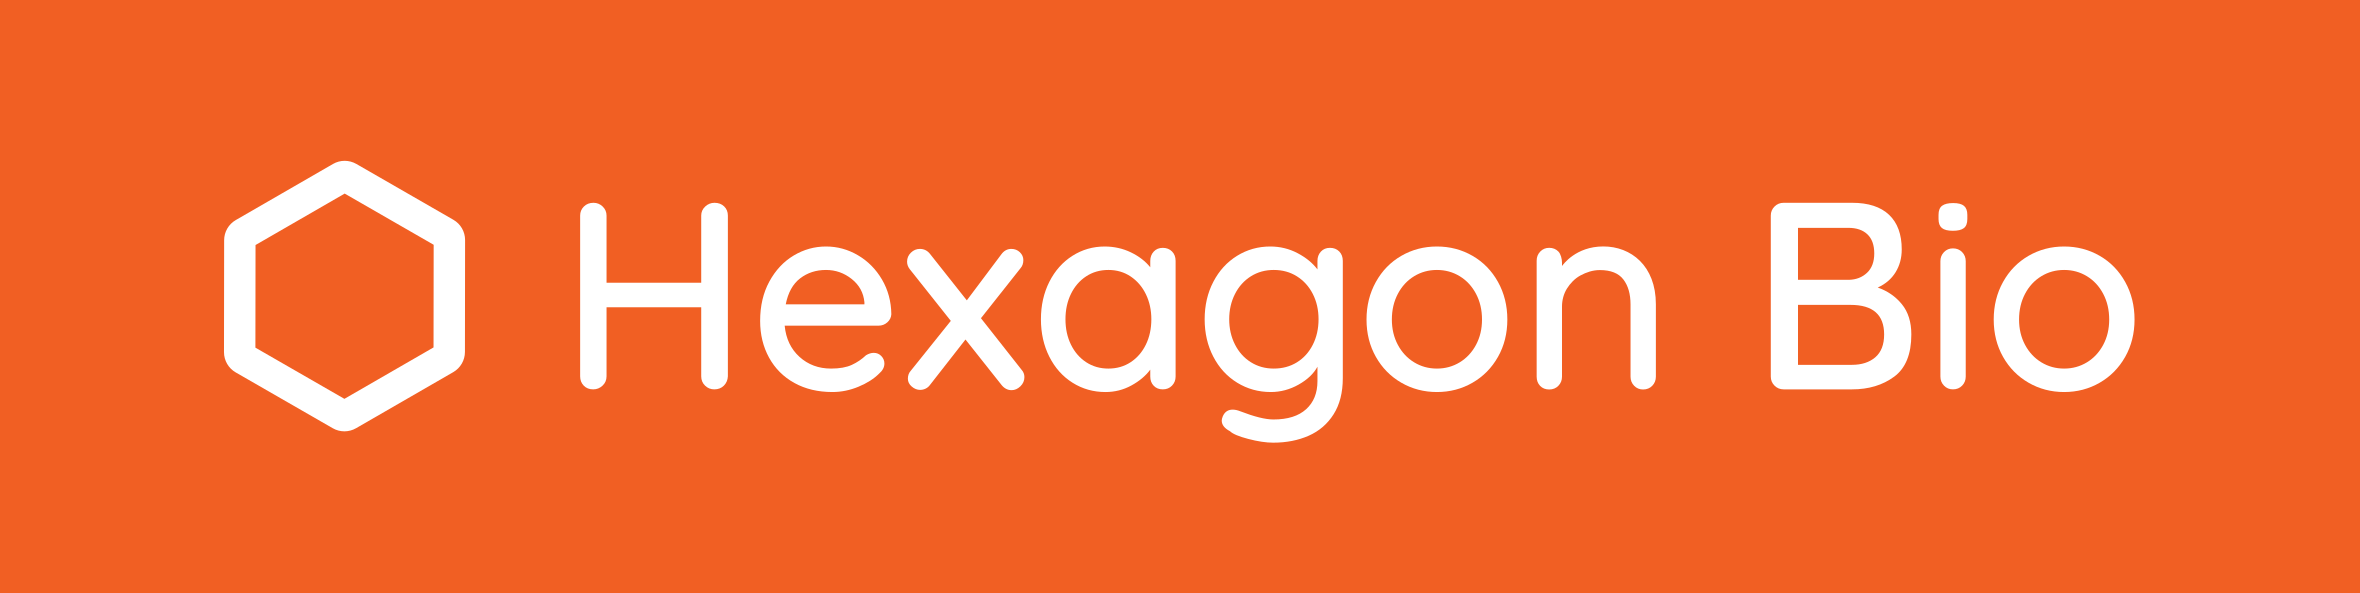 Hexagon Bio Closes $47 Million in Series A Financing to Advance Novel Oncology and Infectious Disease Therapies